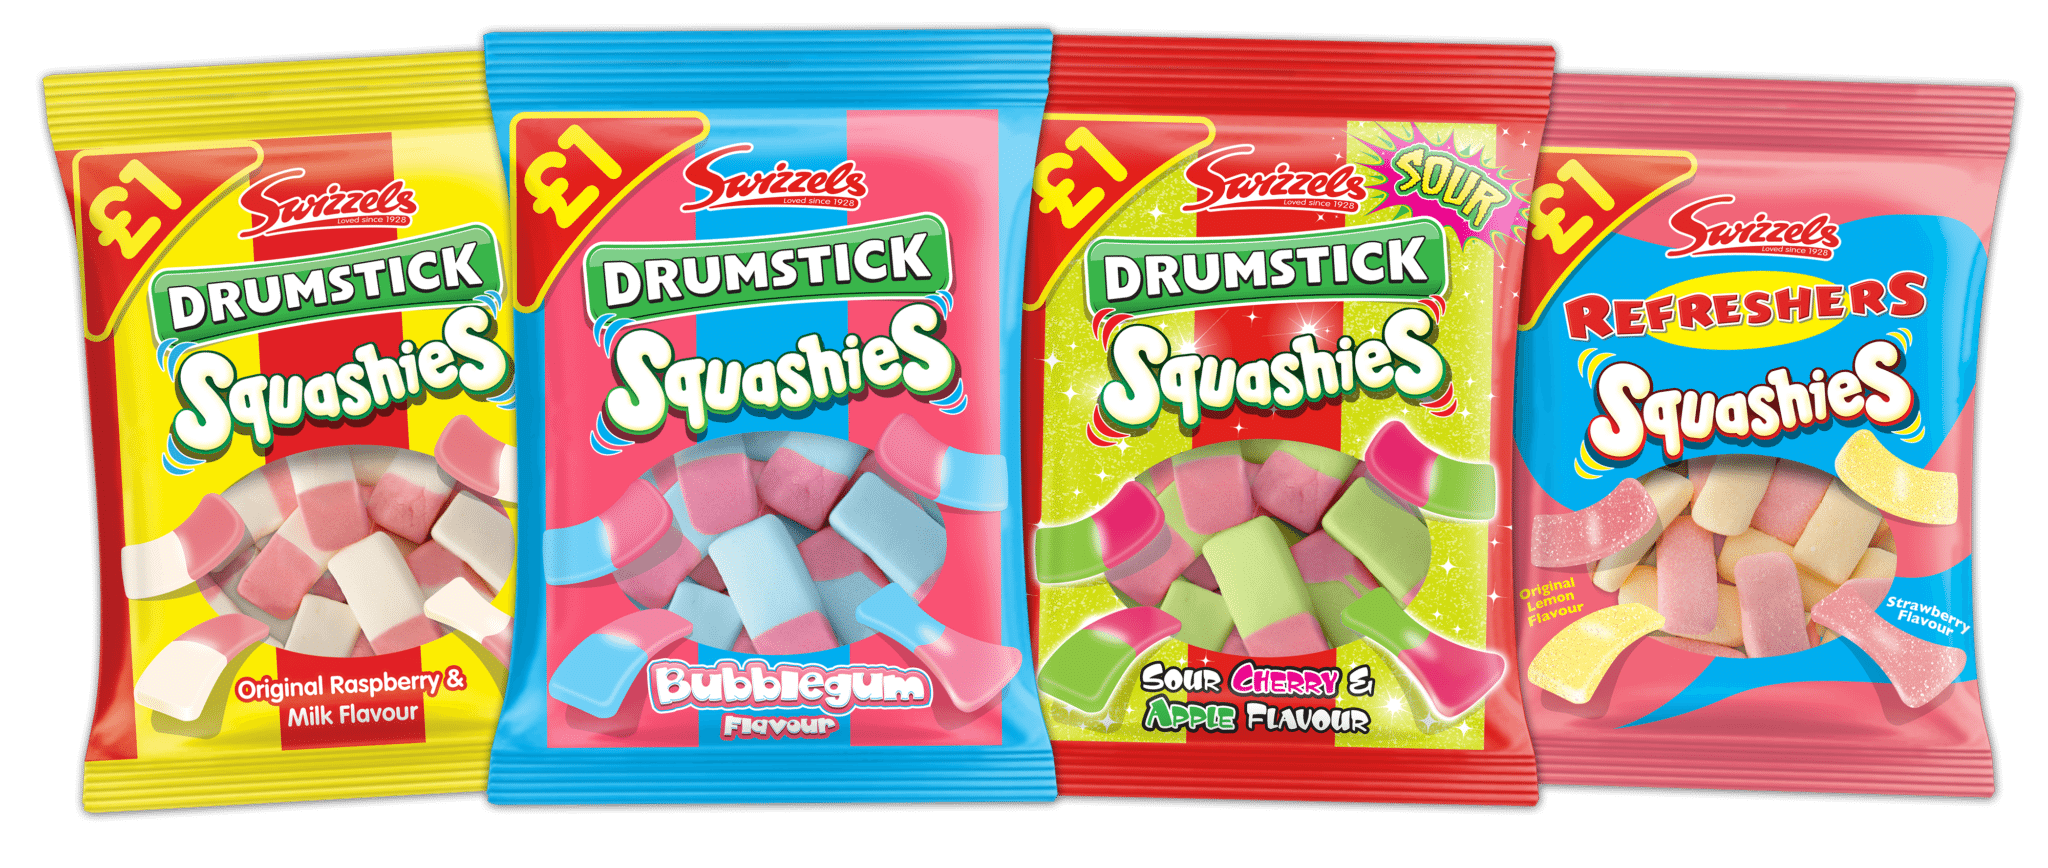 The Squashies range offers a new take on classic sweet brands, and is Swizz...